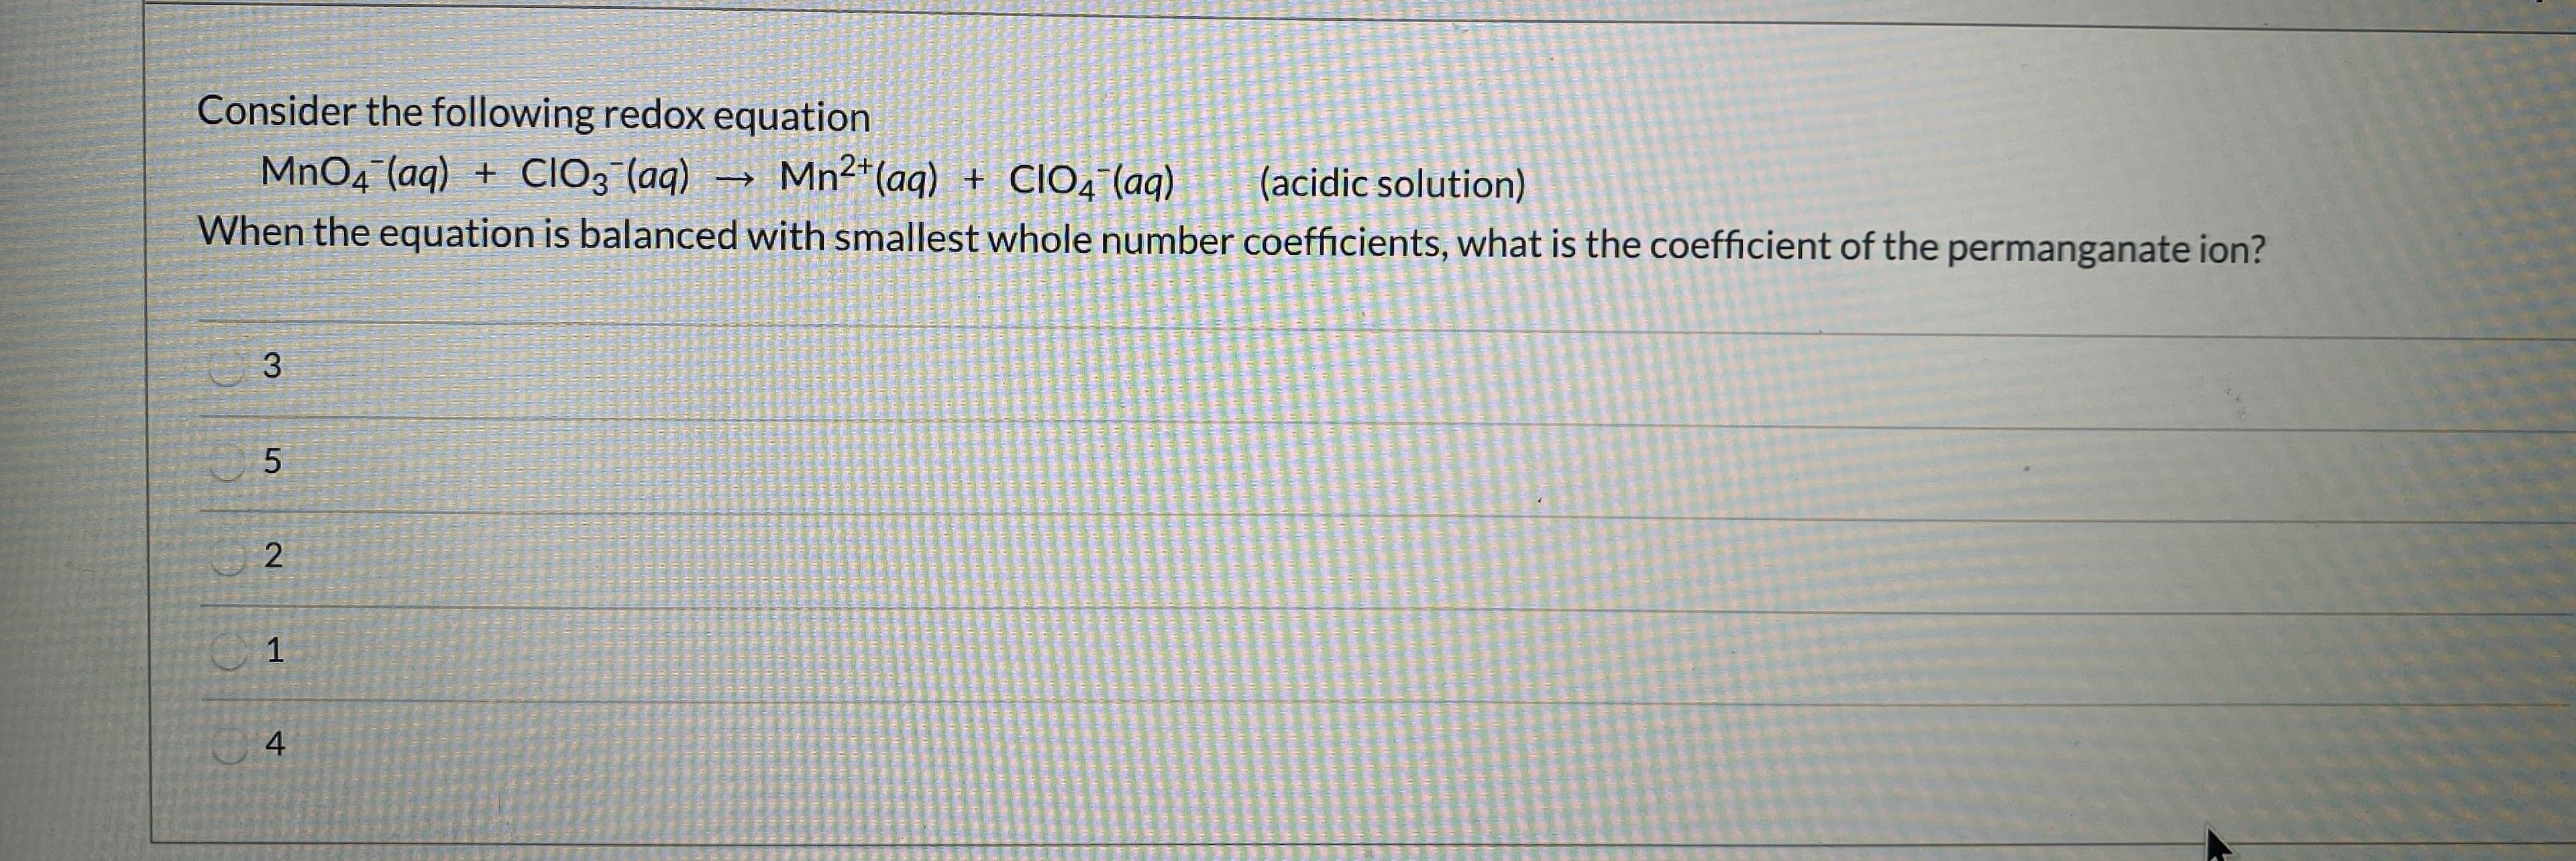 Consider the following redox equation
MnO4 (aq)
When the equation is balaced with smallest whole number coefficients, what is the coefficient of the permanganate ion?
CIO; (aq)
Mn2*(ag) + CIO4 (ag)
(acidic solution)
2.
